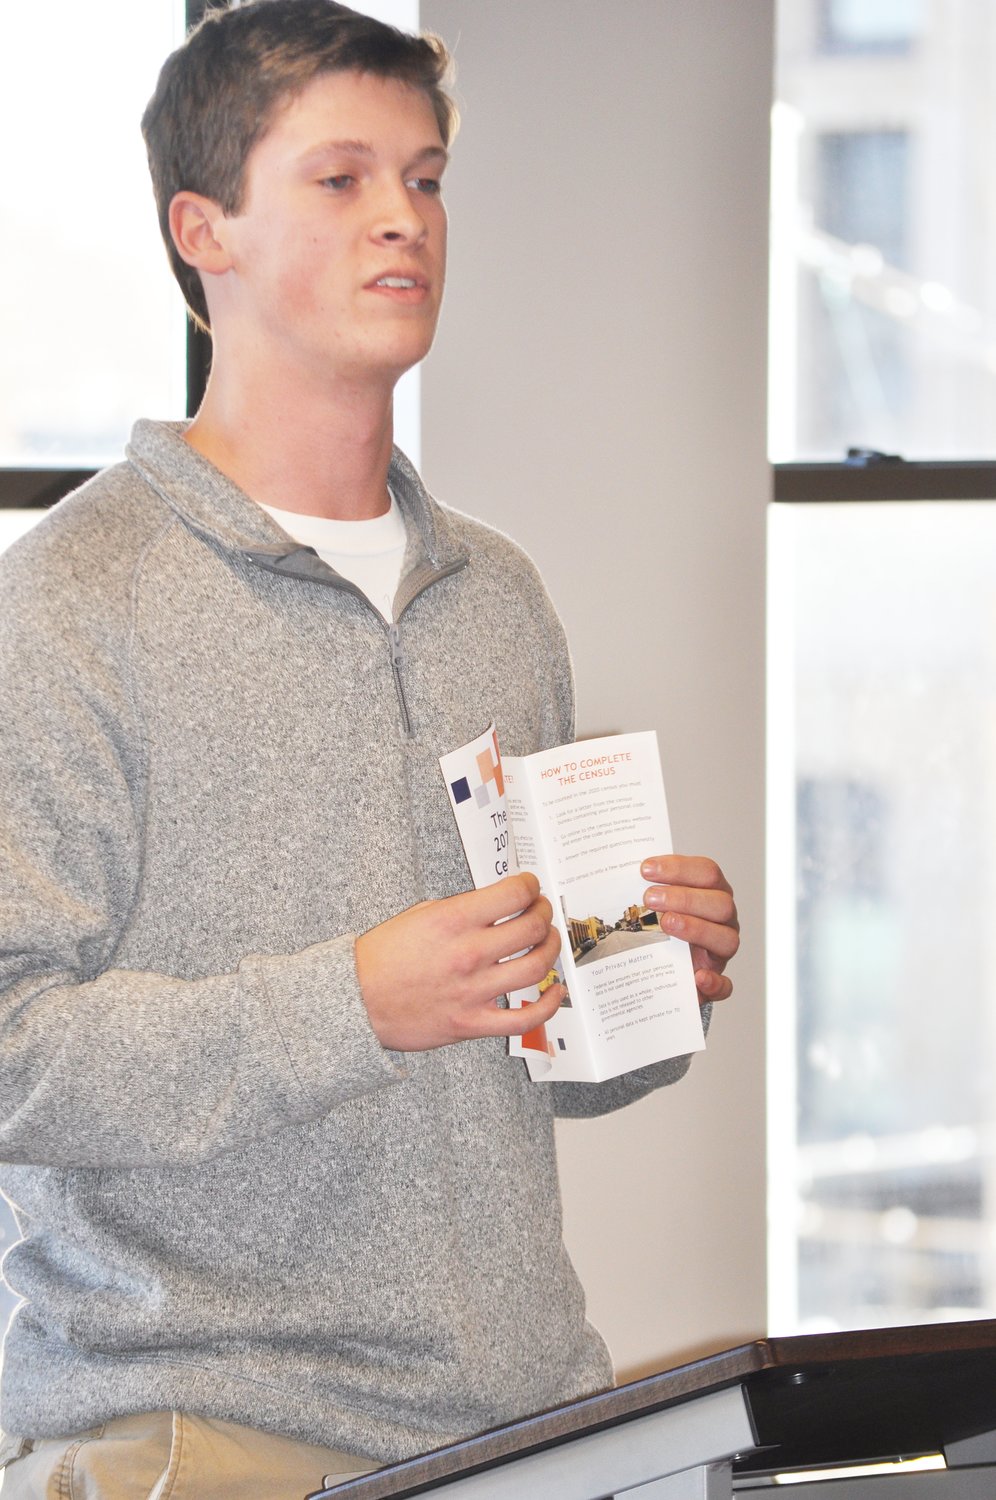 Wabash College student Brayden Lentz shows a brochure about the census Wednesday at Fusion 54. Students launched an online collection of materials to encourage local participation in next year's count.